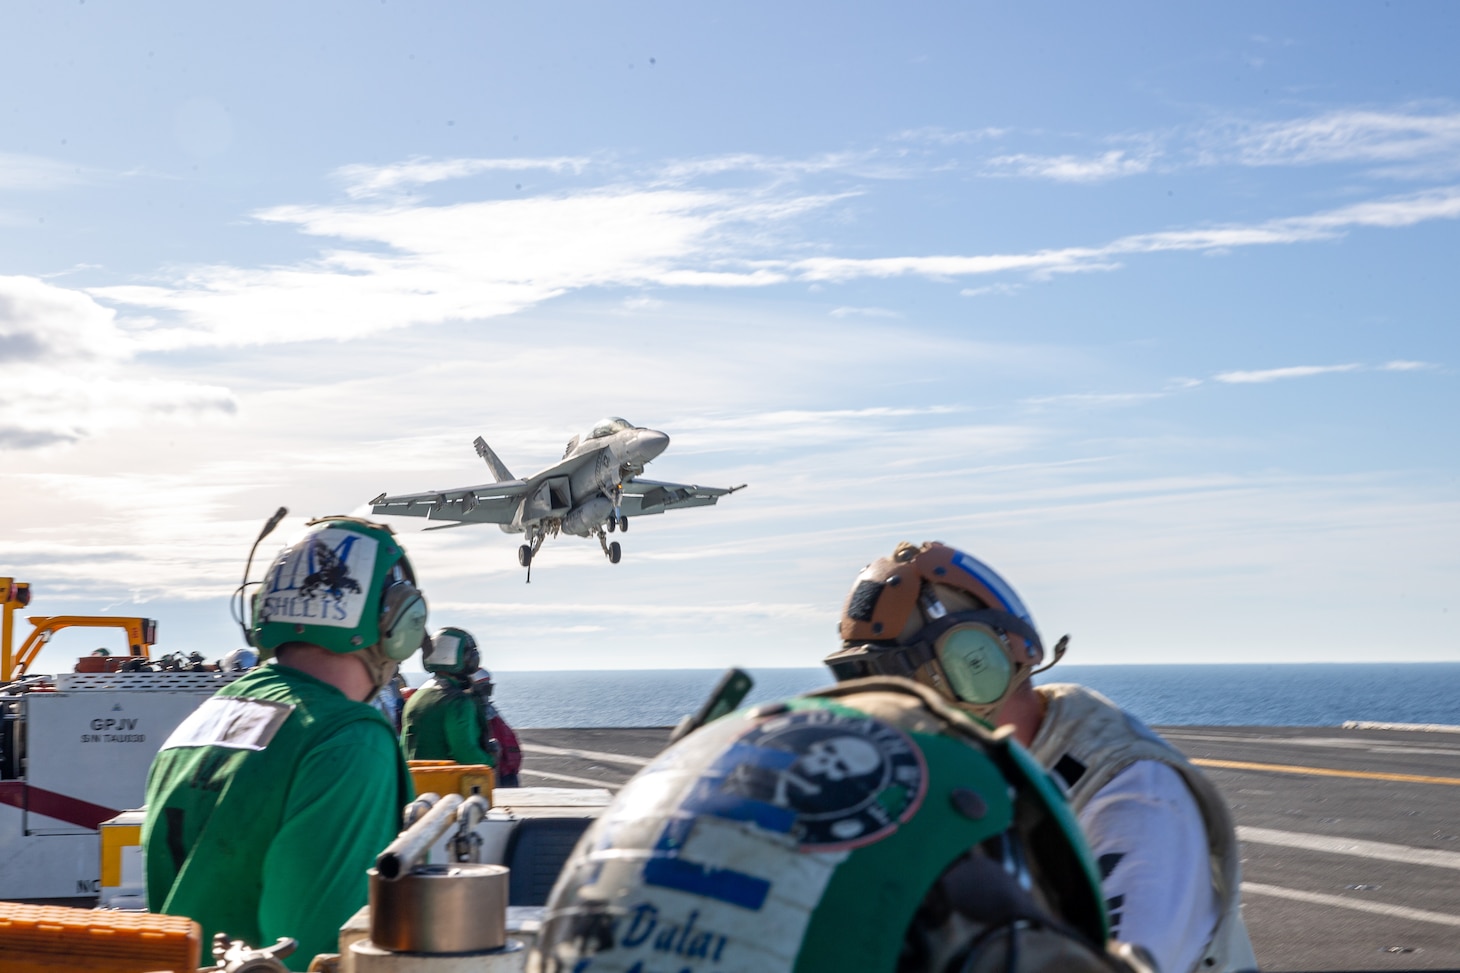 An F/A-18F Super Hornet attached to the "Blacklions" of Strike Fighter Squadron (VFA) 213, prepares to land on USS Gerald R. Ford's (CVN 78) flight deck, Nov. 8, 2020.